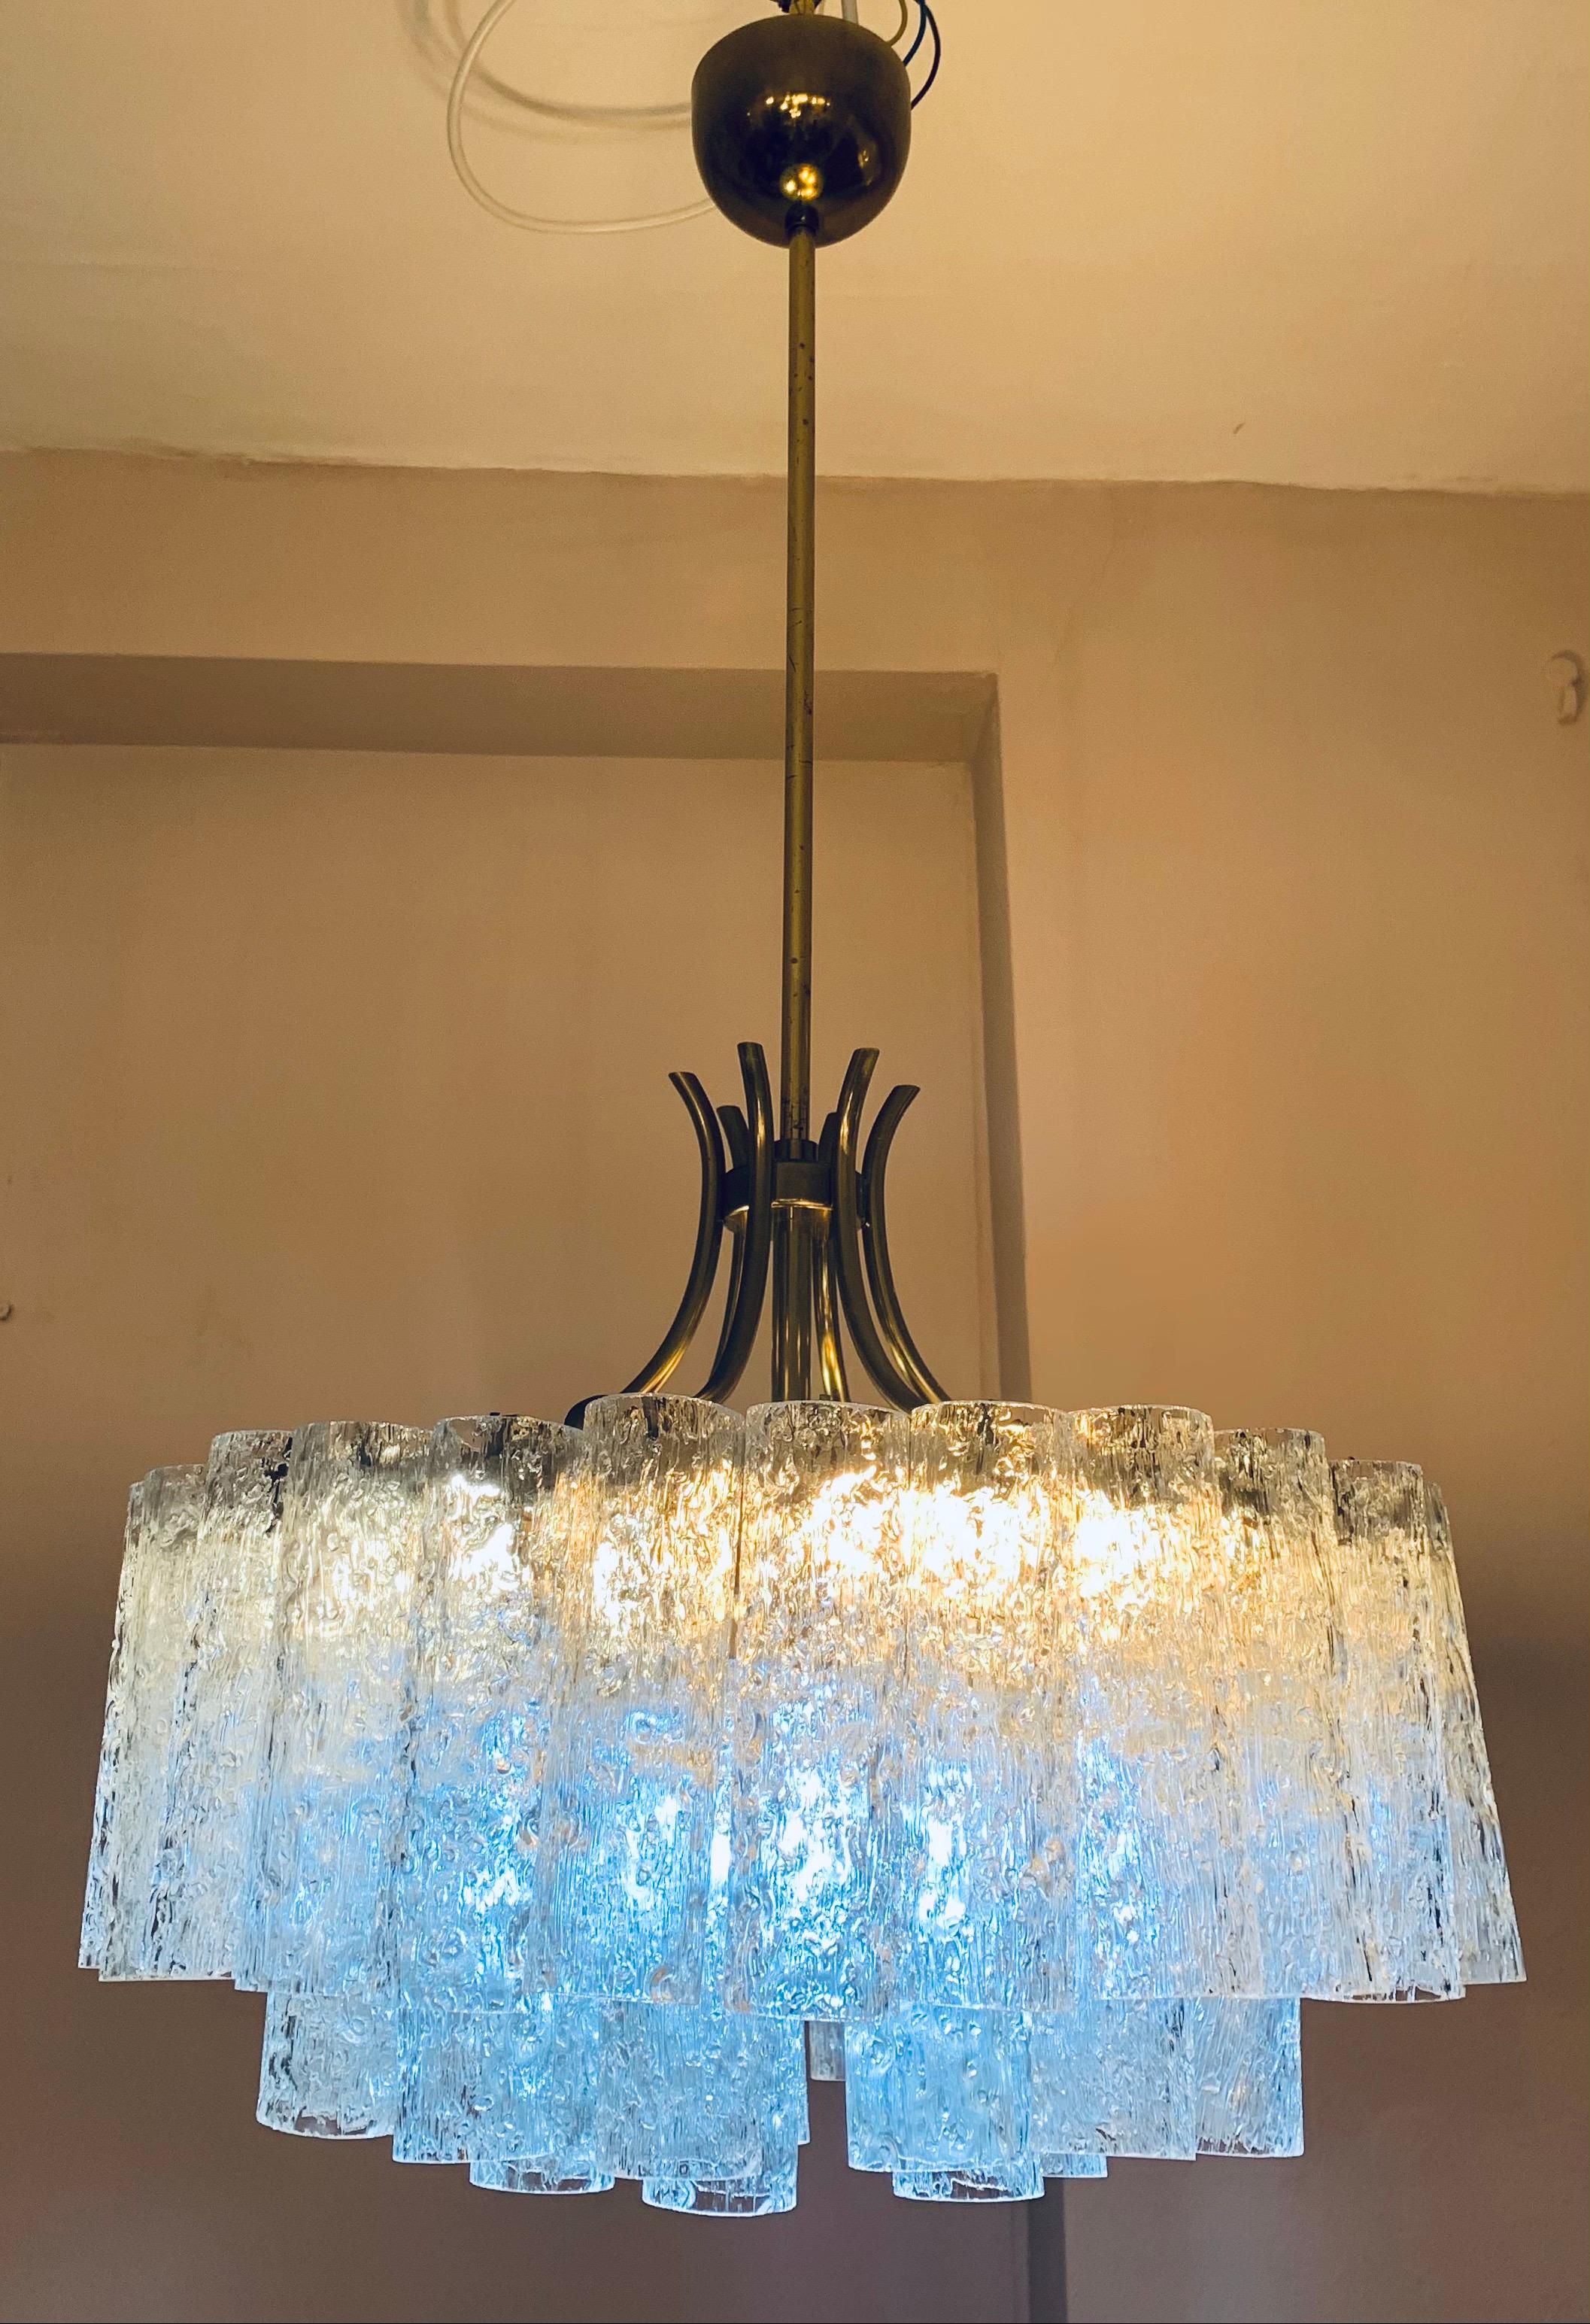 1970s mid century textured clear glass tubular glass chandelier. Manufactured in Germany by Doria Leuchten. The three-tier glass tubes hang at varying heights from a tubular brass frame. The glass tubes are all the same diameter. The stem can be